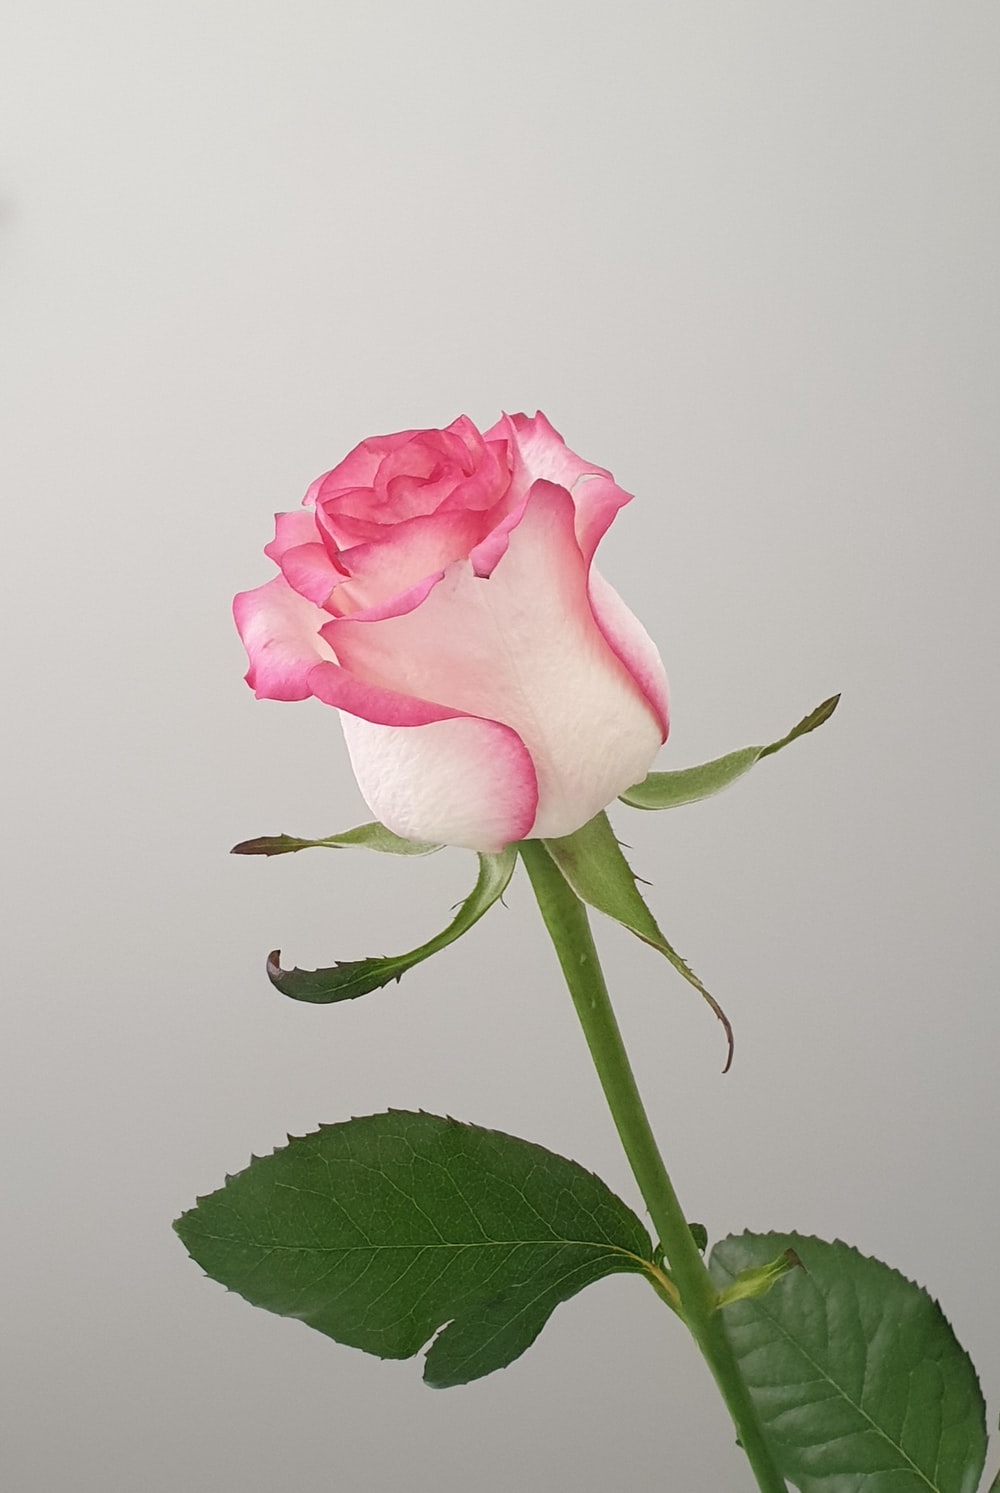 Rose Flower Picture. Download Free Image